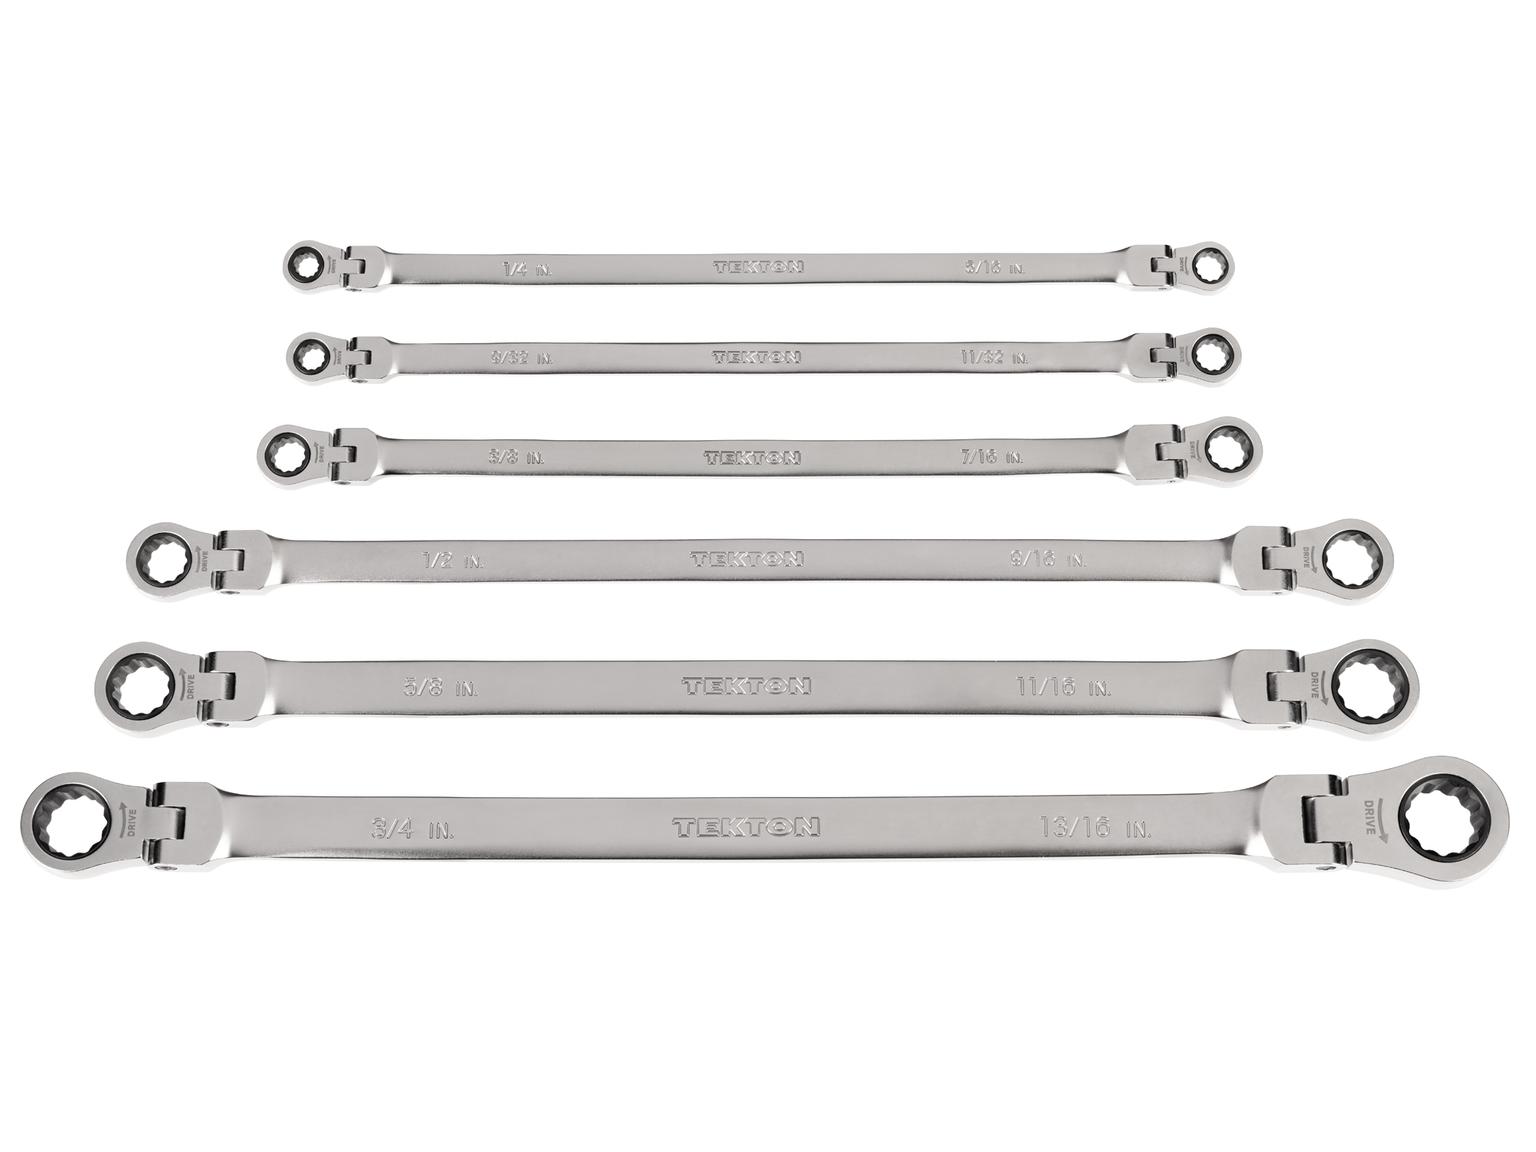 Long Flex Head 12-Point Ratcheting Box End Wrench Set (6-Piece)